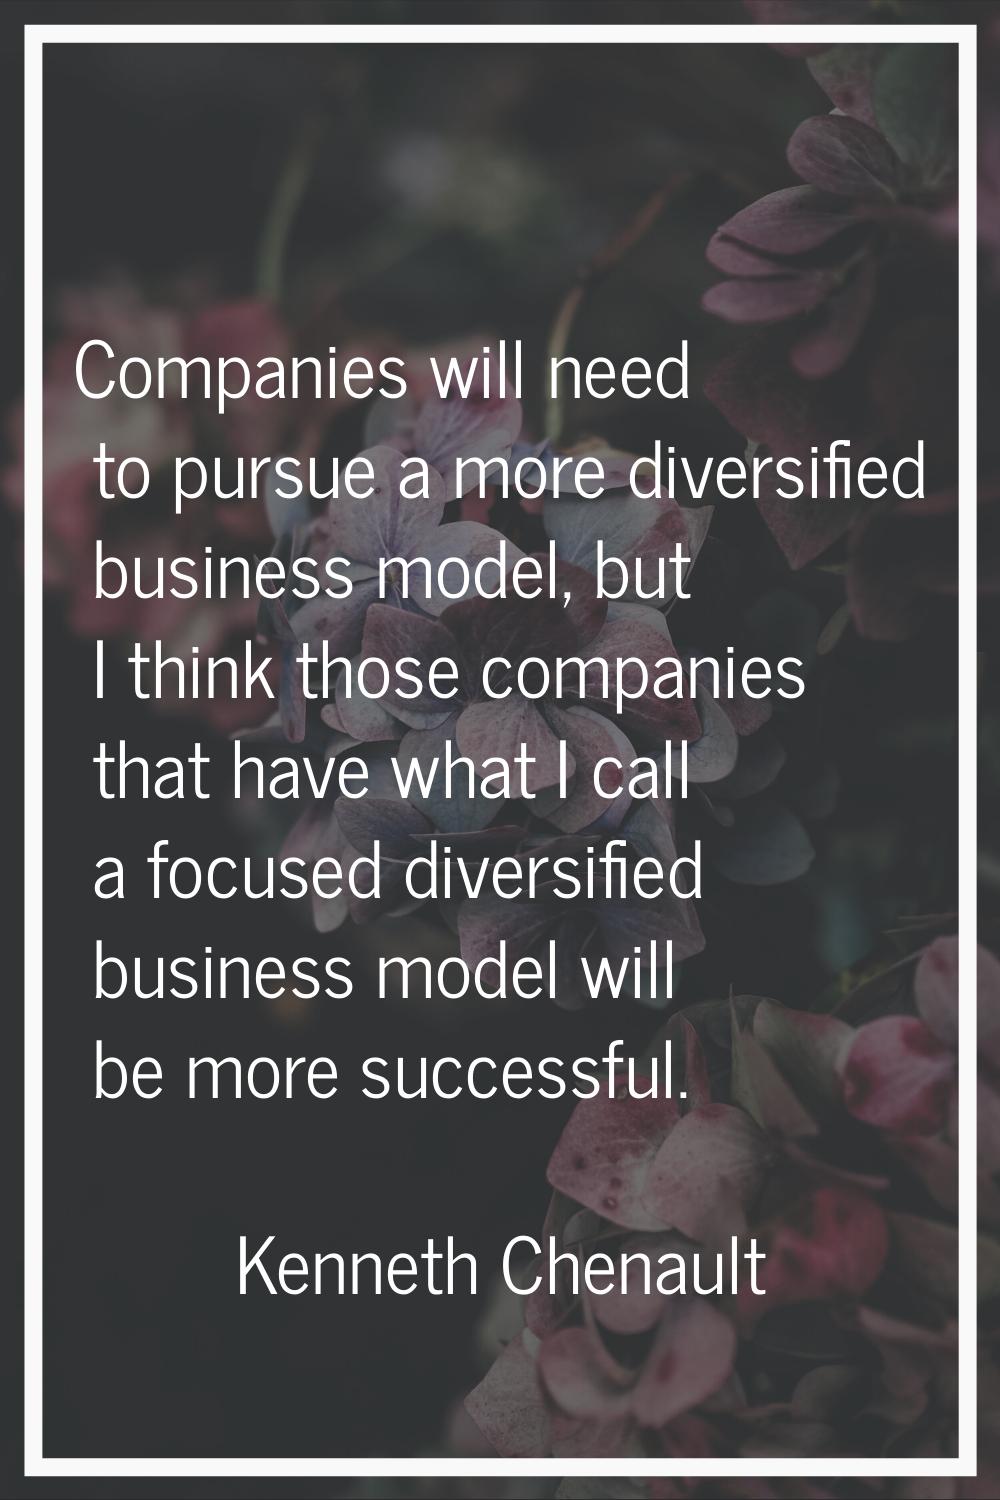 Companies will need to pursue a more diversified business model, but I think those companies that h